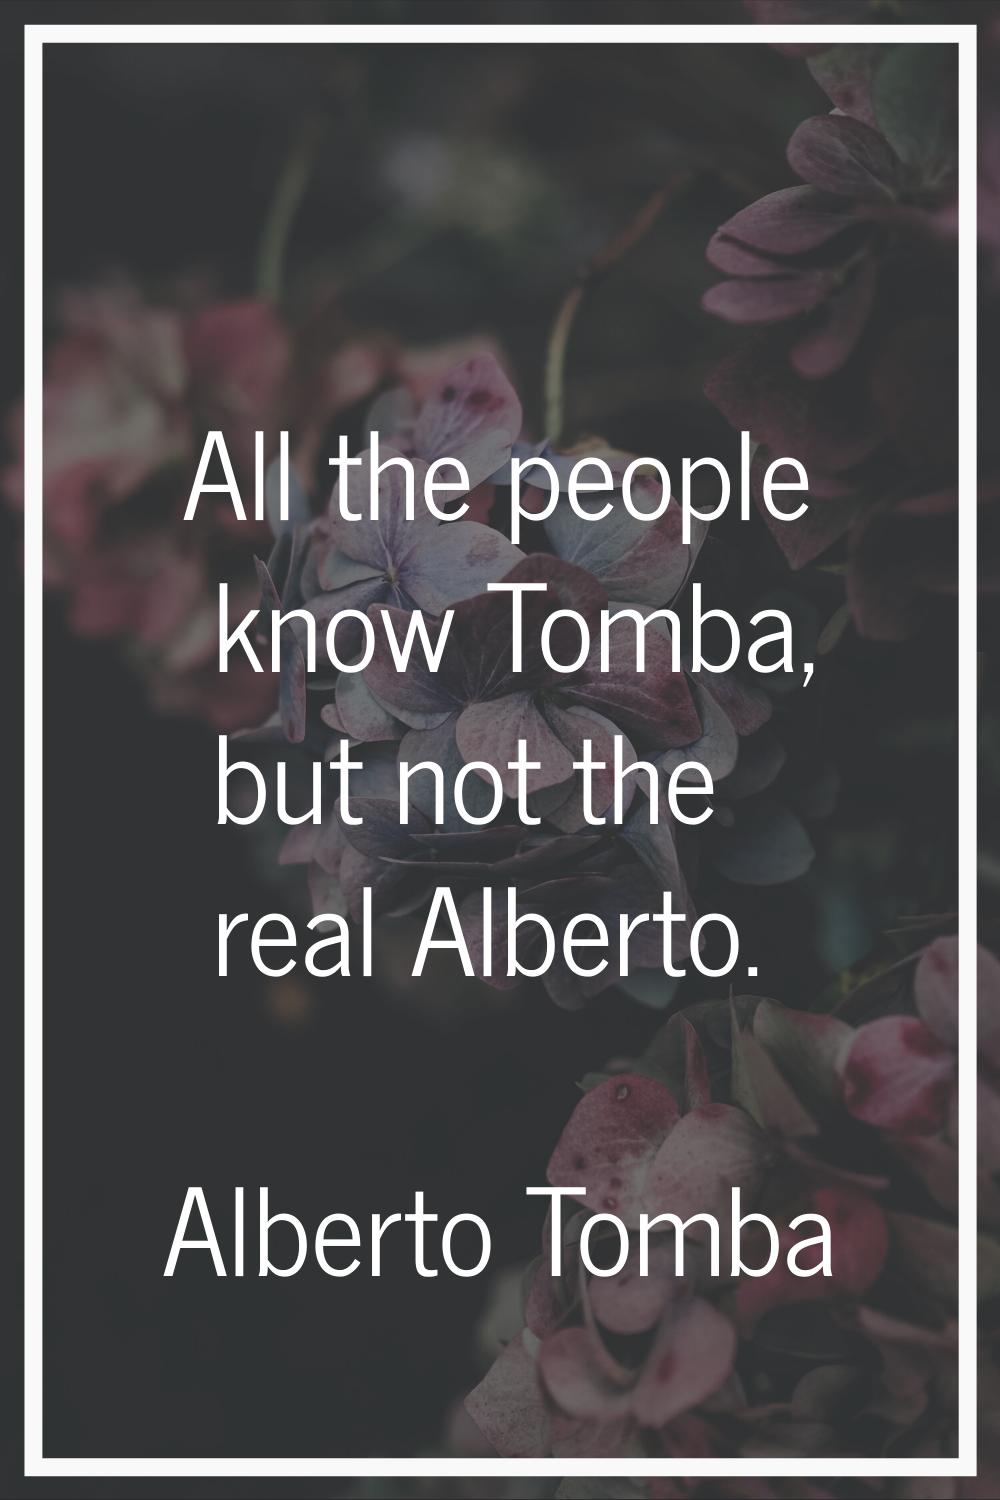 All the people know Tomba, but not the real Alberto.